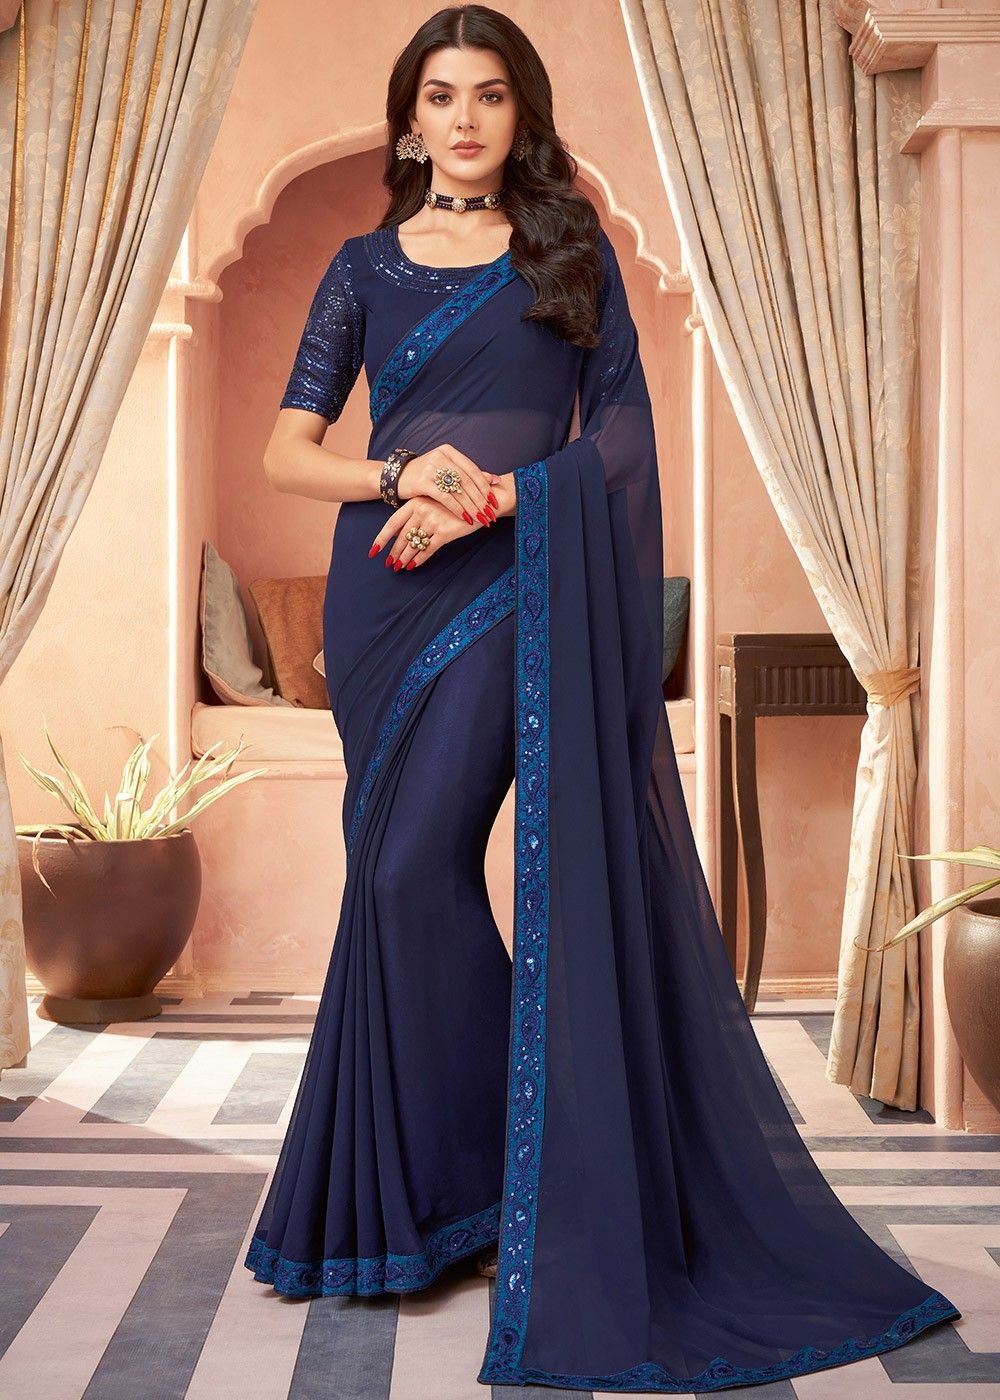 Buy this Navy blue saree & peach blouse with hand embroidery on sleeves